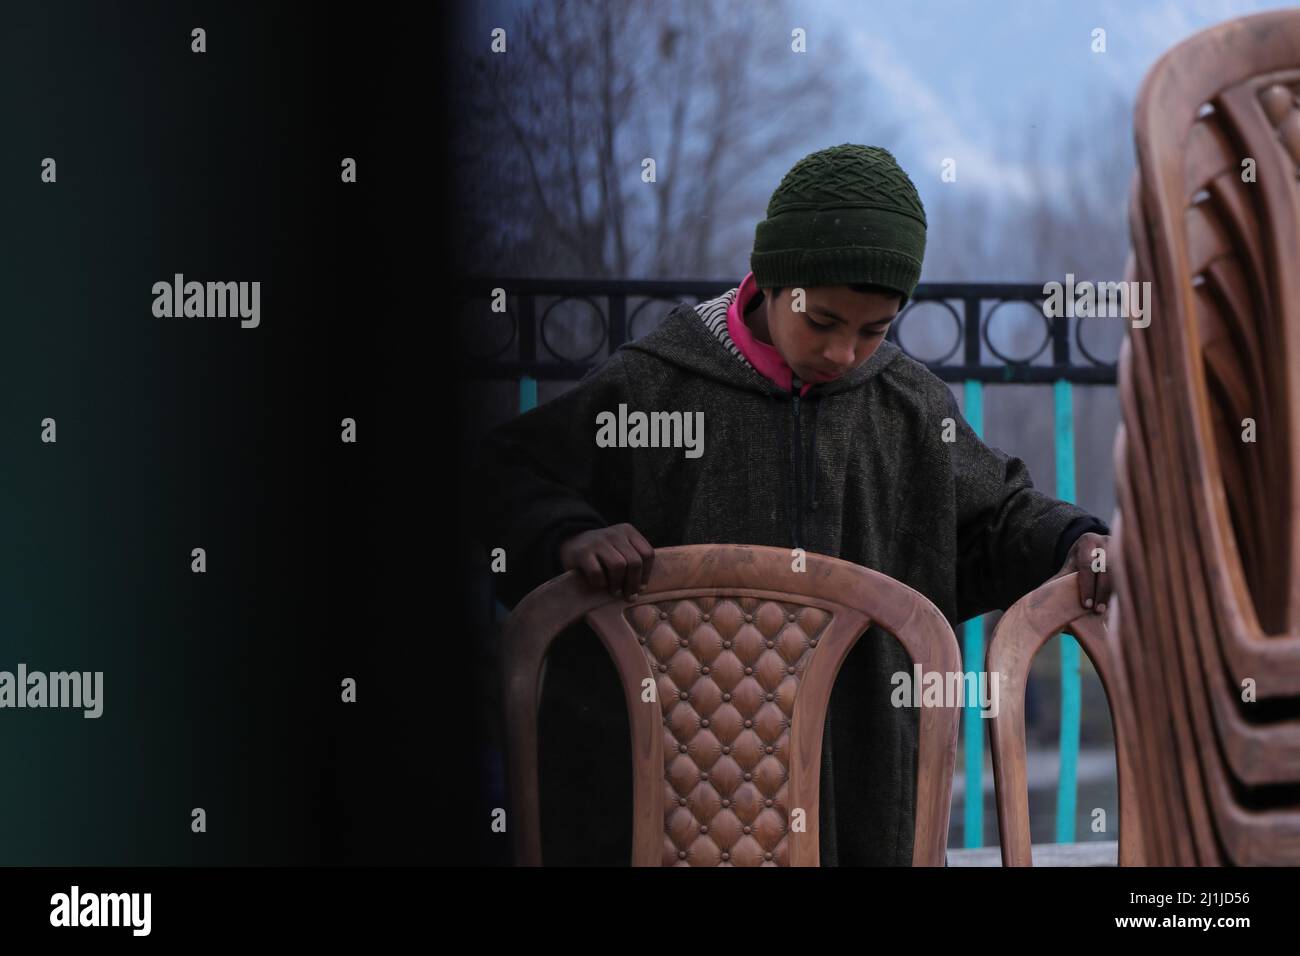 Kashmir, India. 26th Mar, 2022. March 26, 2022, Srinagar, Jammu and Kashmir, India: A child places chairs at a roadside hotel in Srinagar on March 26, 2022. According to a 2018 report by the International Labour Organization (ILO), the number of child labourers around the world fell from 246 million in 2000 to around 152 million in 2016. However, millions of children continue to be exploited for cheap labour, especially in countries such as India. Credit: ZUMA Press, Inc./Alamy Live News Stock Photo